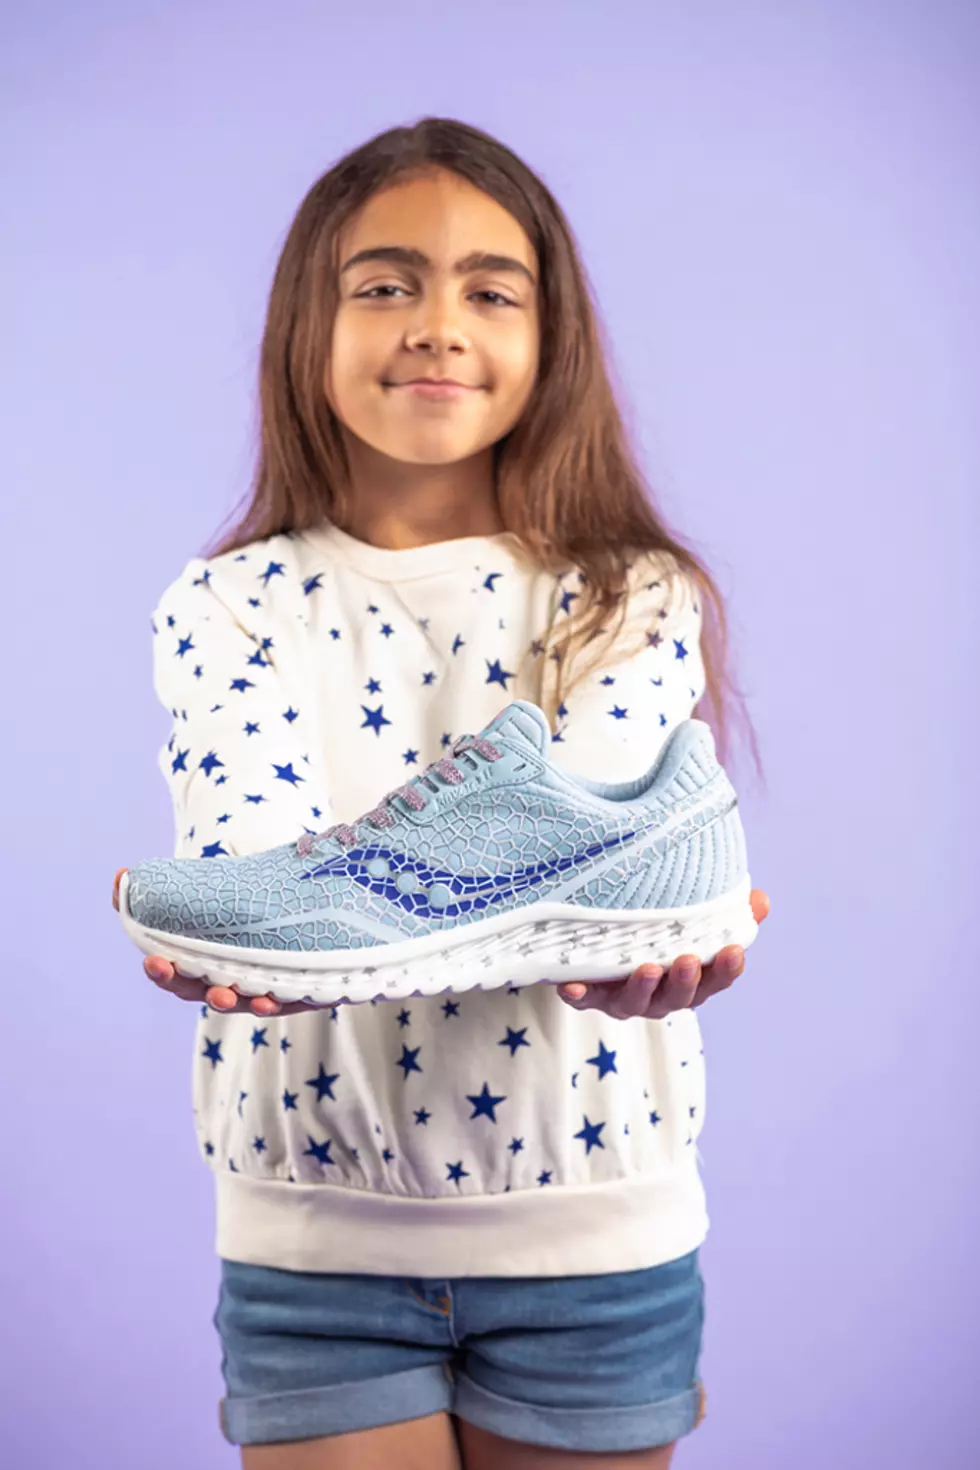 TMSG: Boston Children’s Hospital Patients Design Shoes For Kids Like Them